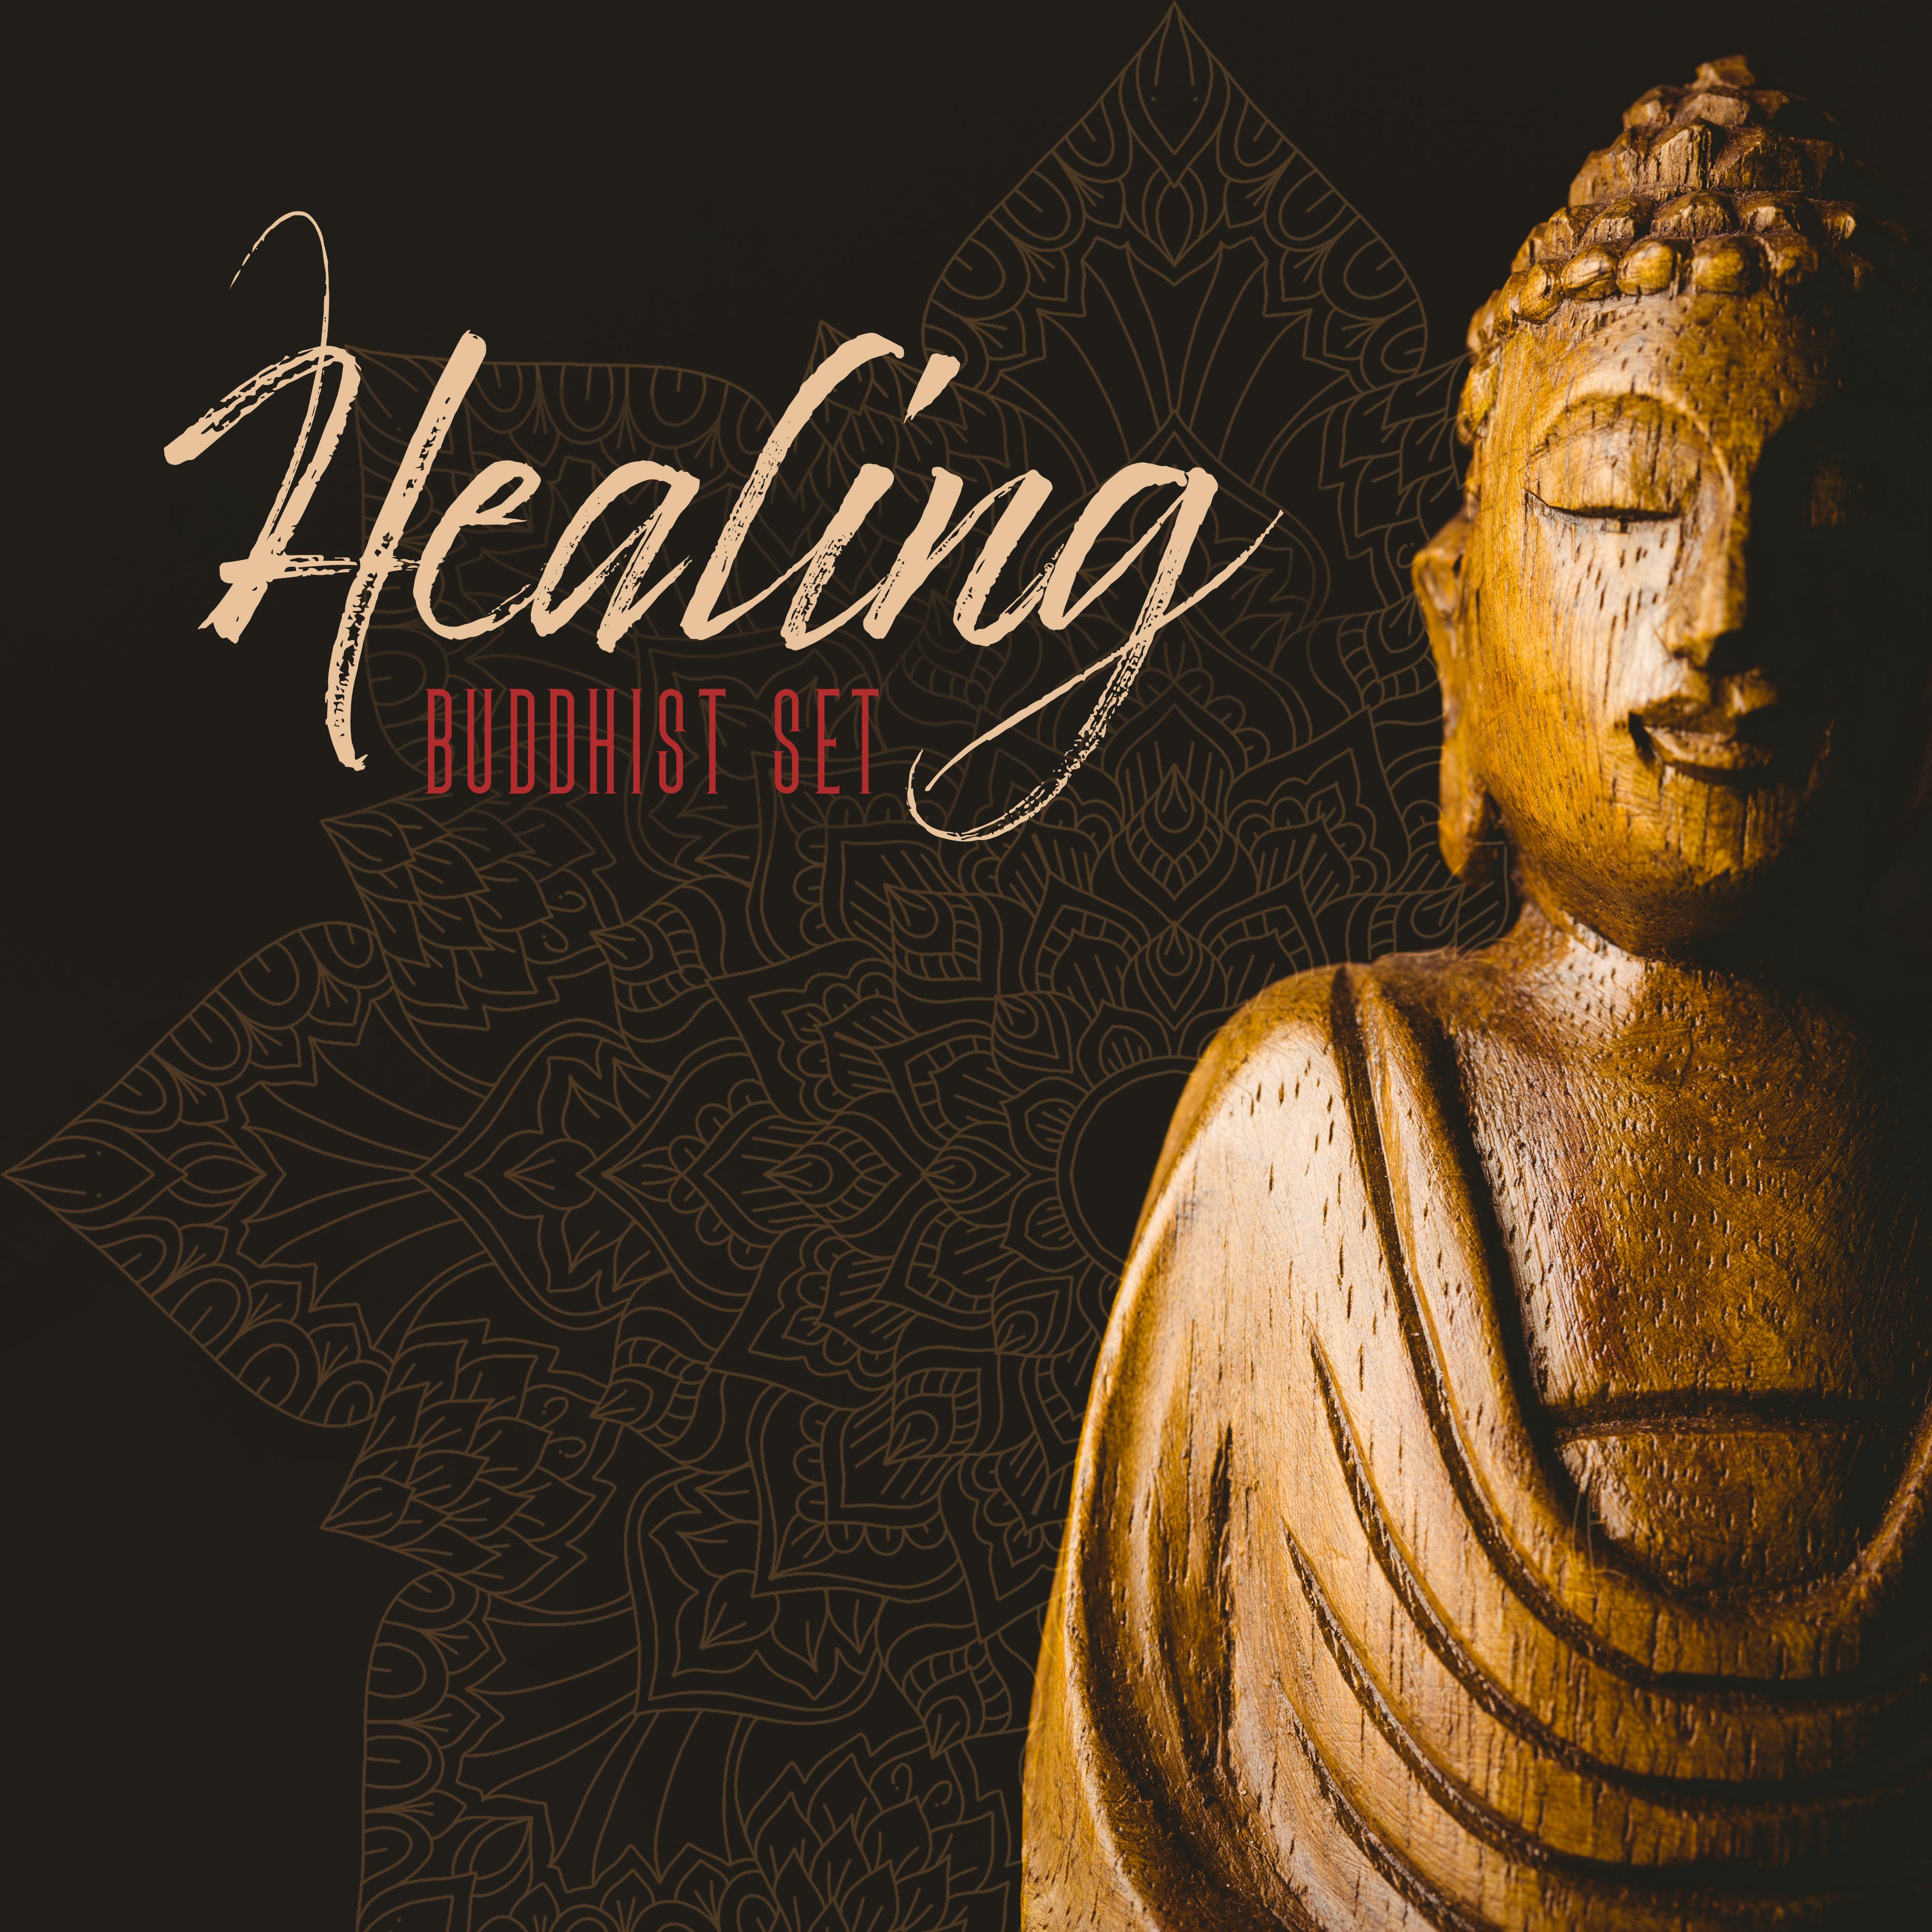 Healing Buddhist Set: Music for Therapy through Meditation, Yoga Exercises, Spa and Massage Treatments, Reiki and Many Others